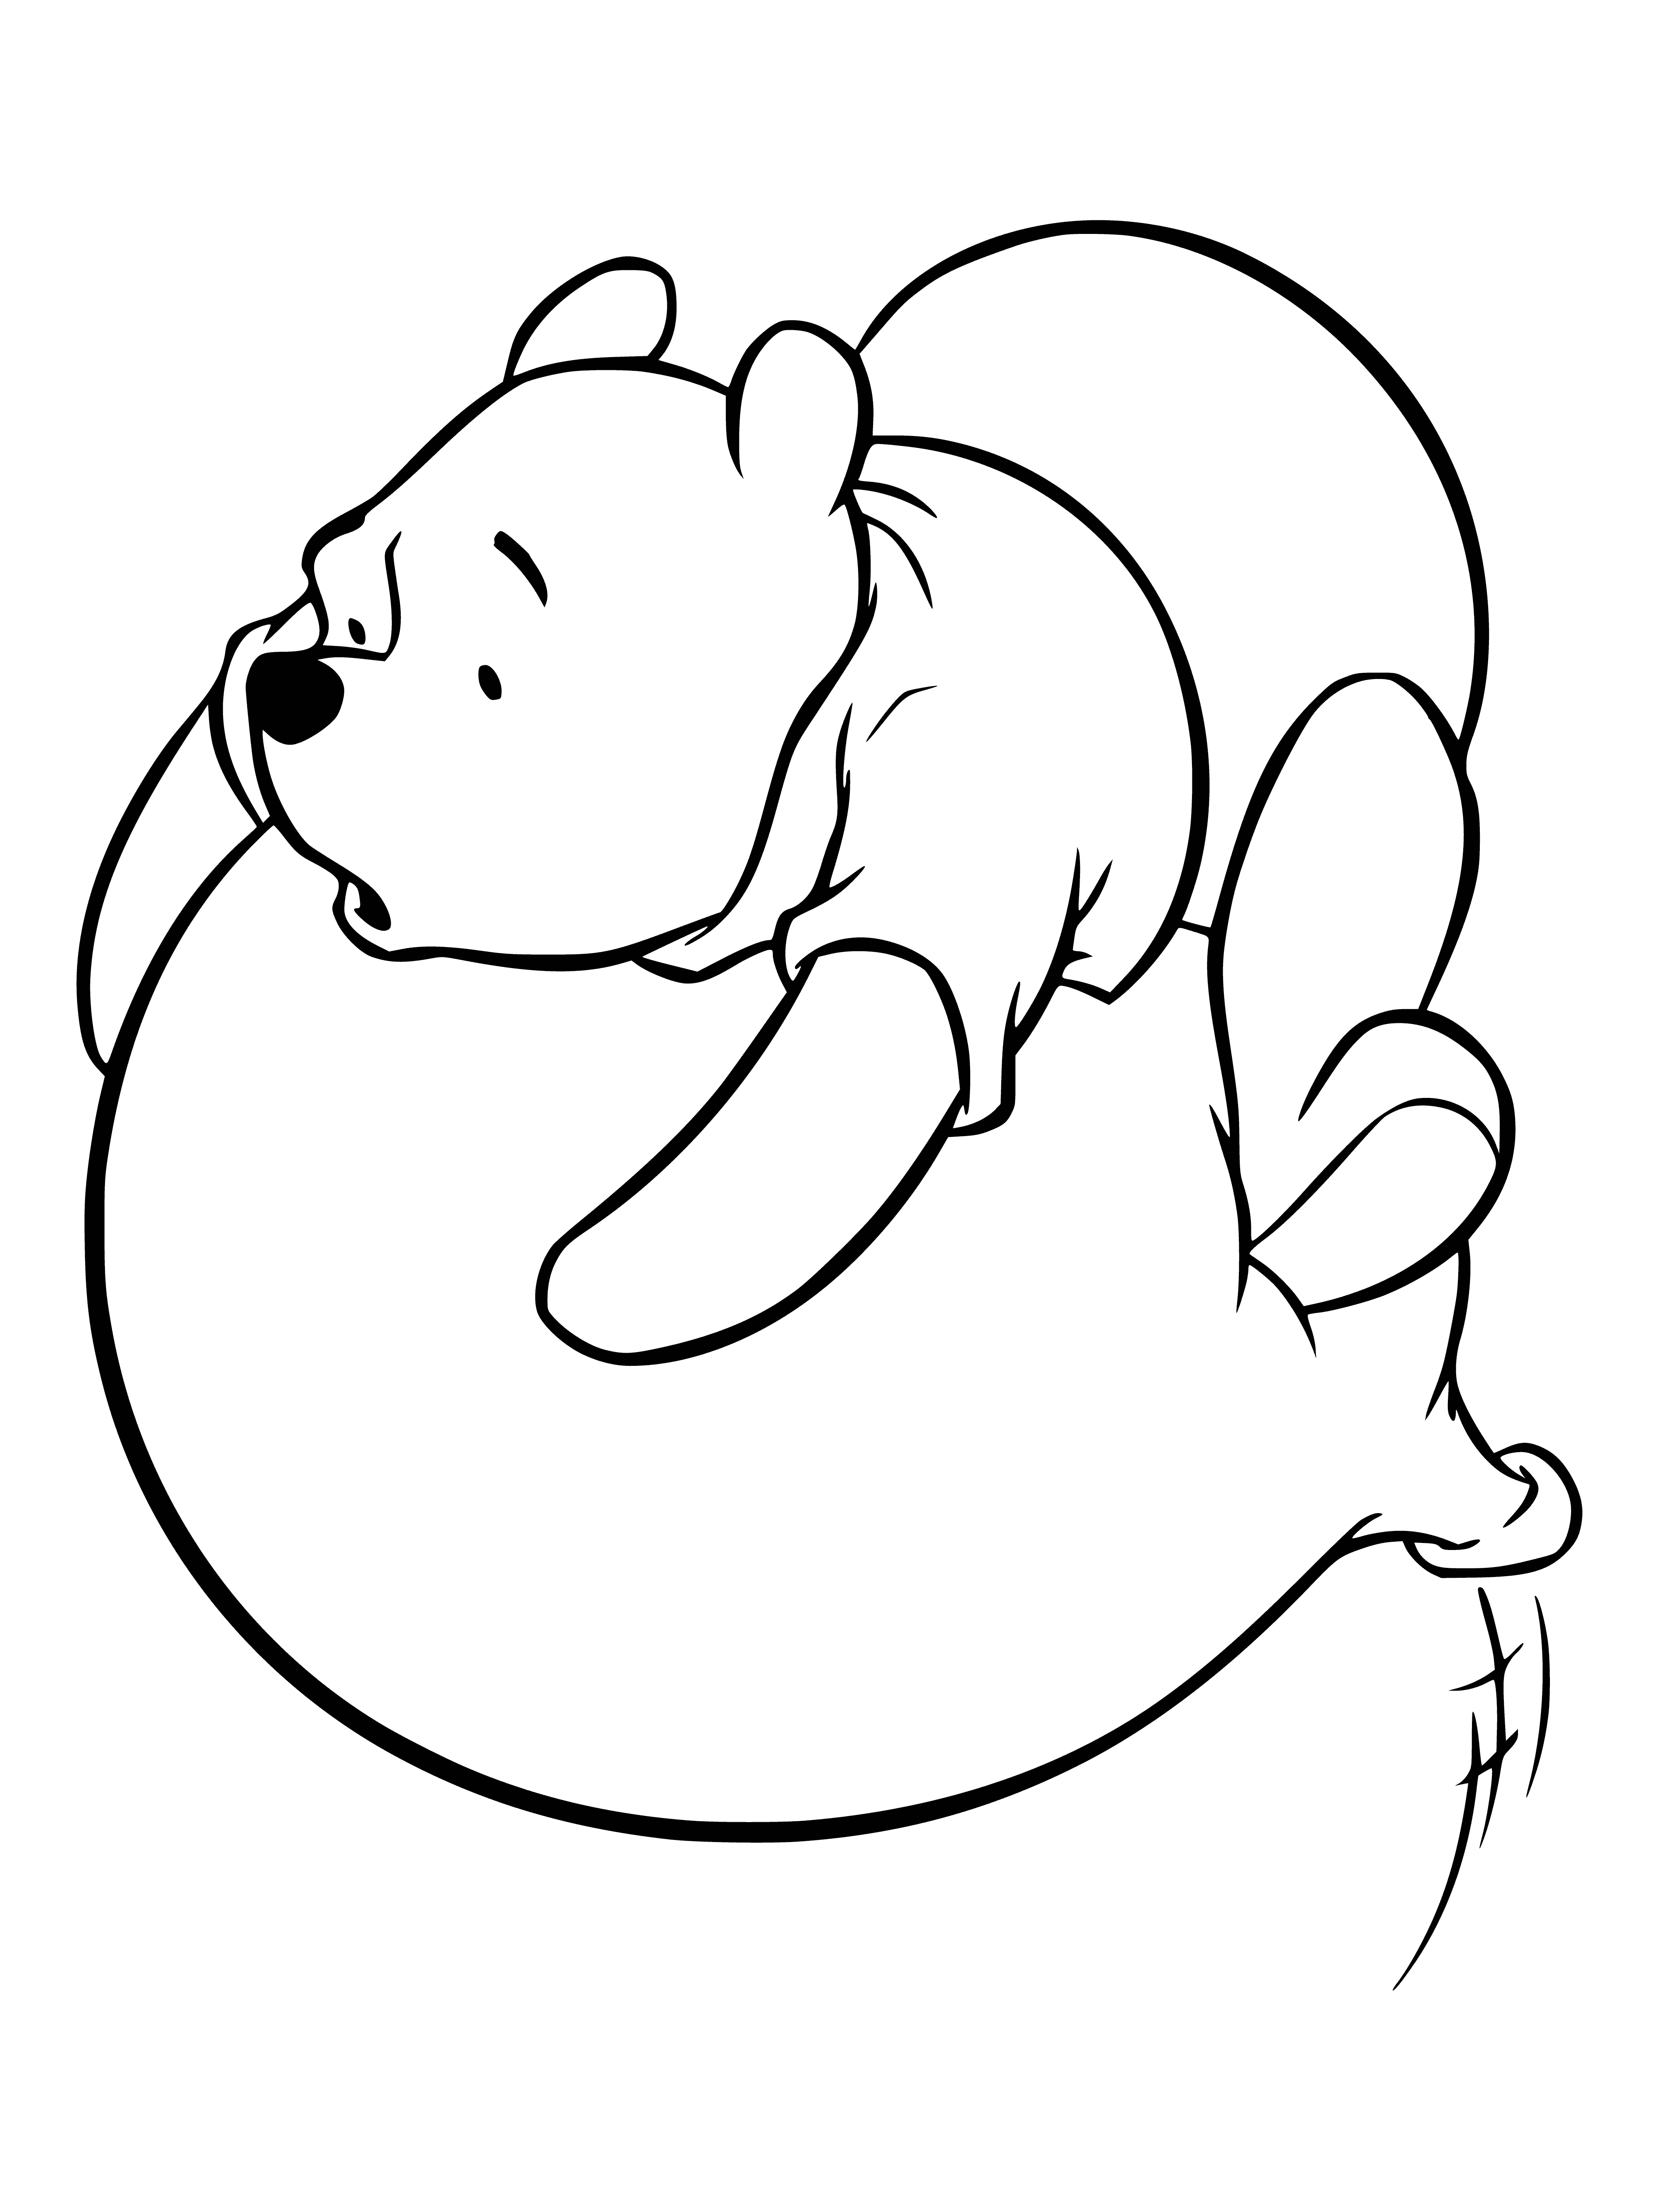 Teddy bear on a ball coloring page